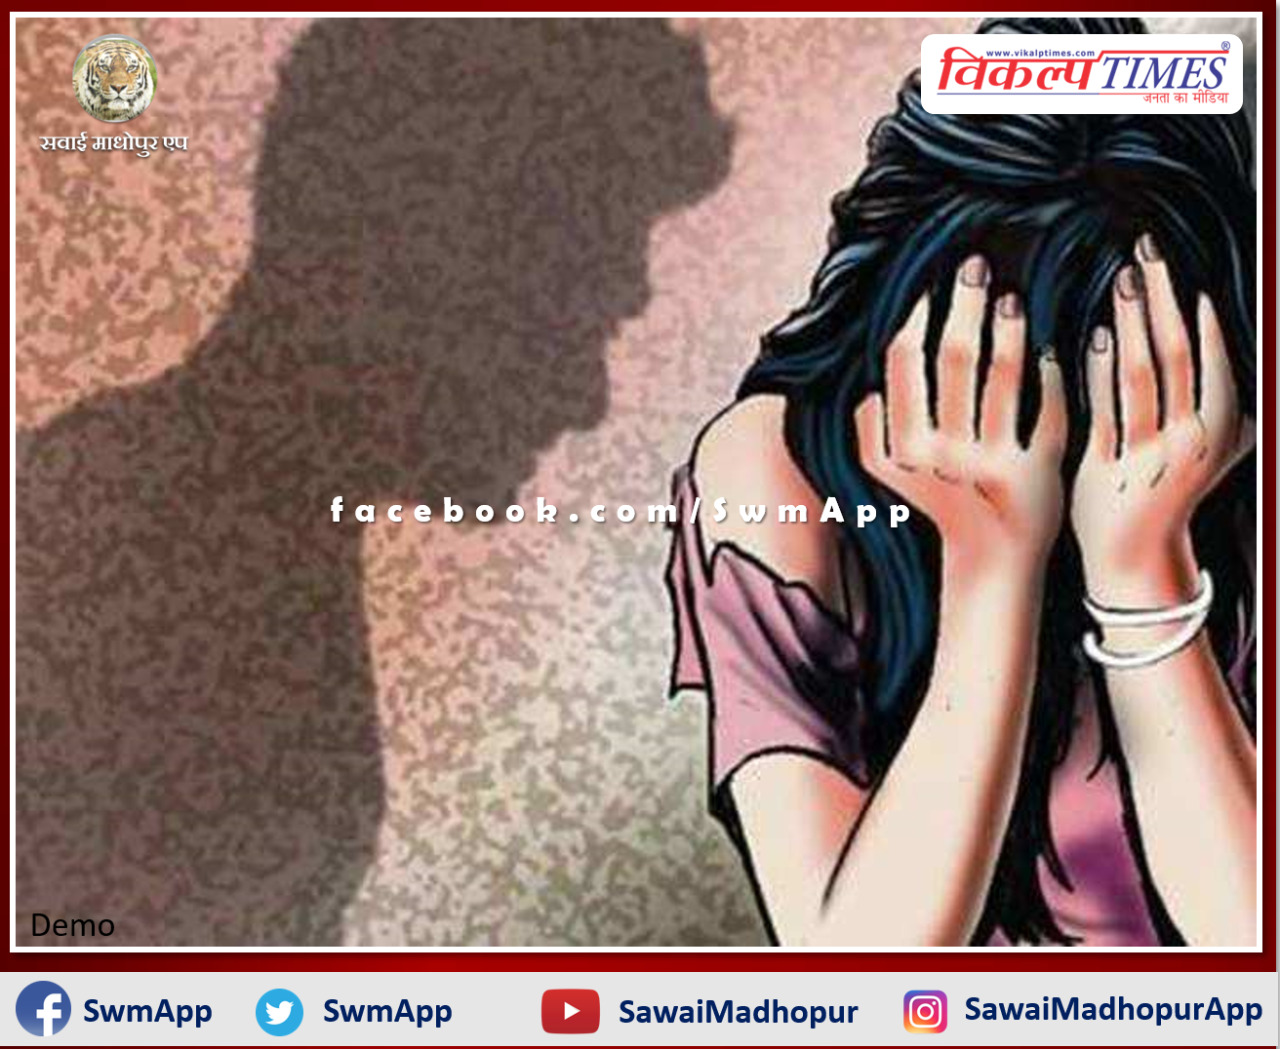 Mother raped by entering the house in front of one and a half year old child in malarna dungar sawai madhopur